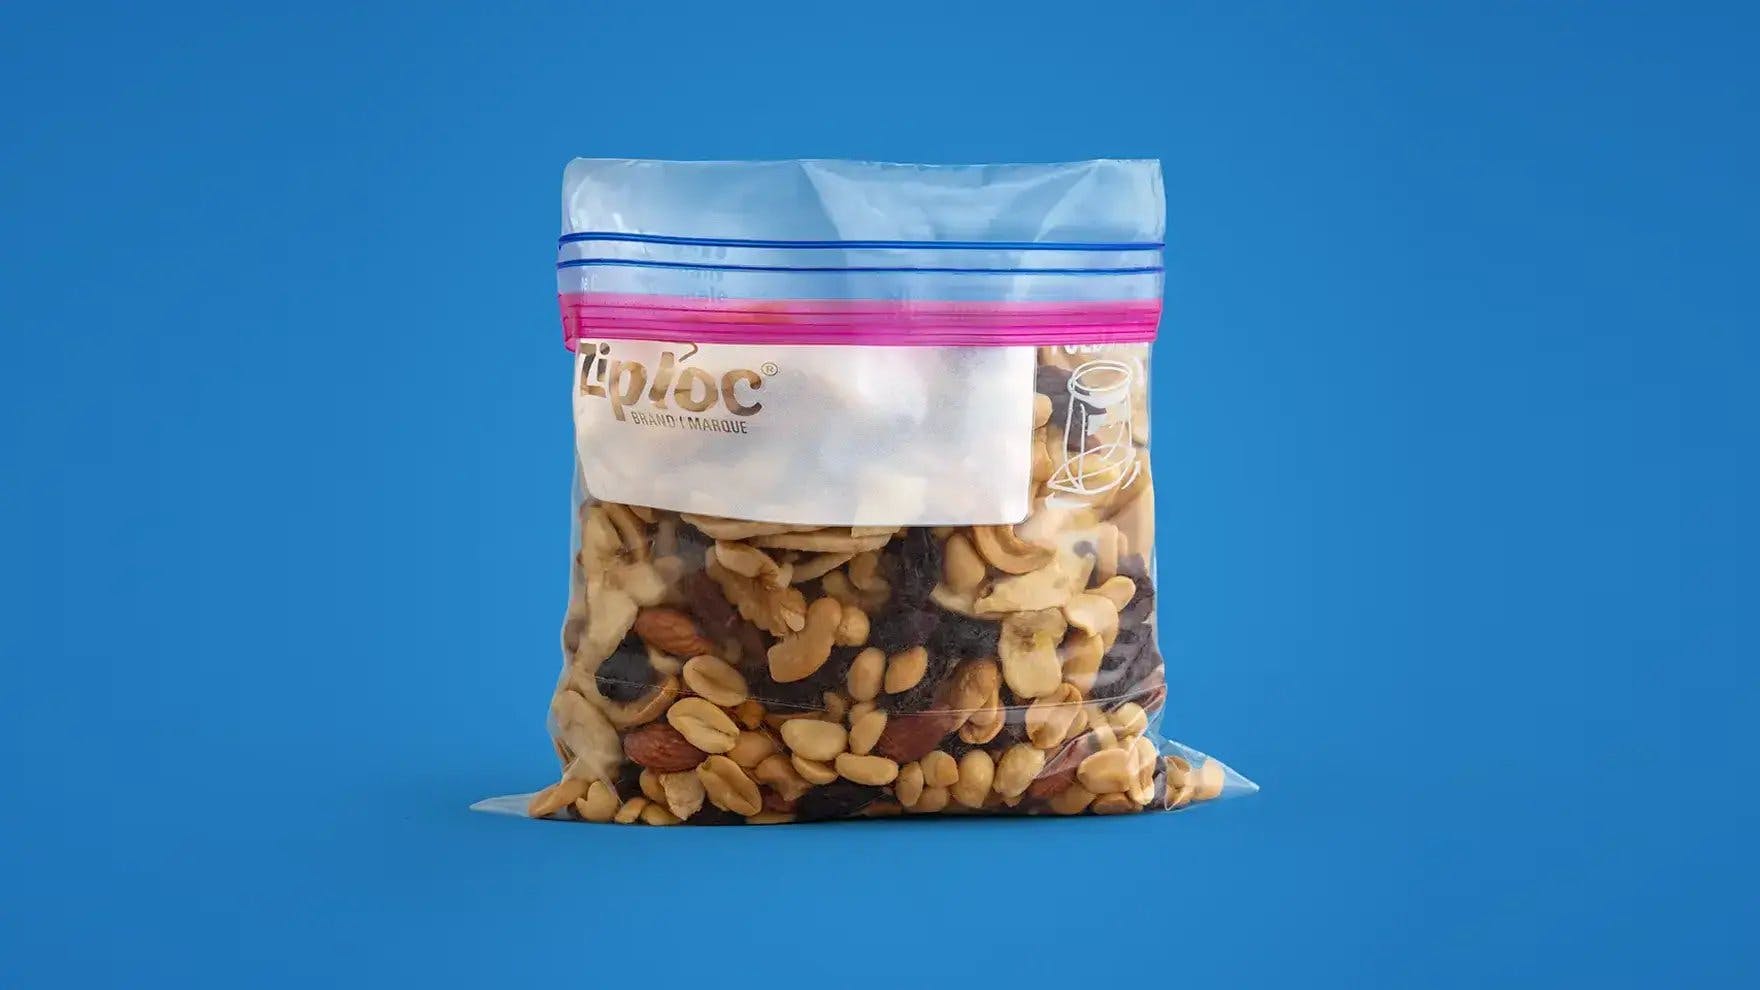 Ziploc large one gallon storage bag filled with mixed nuts.